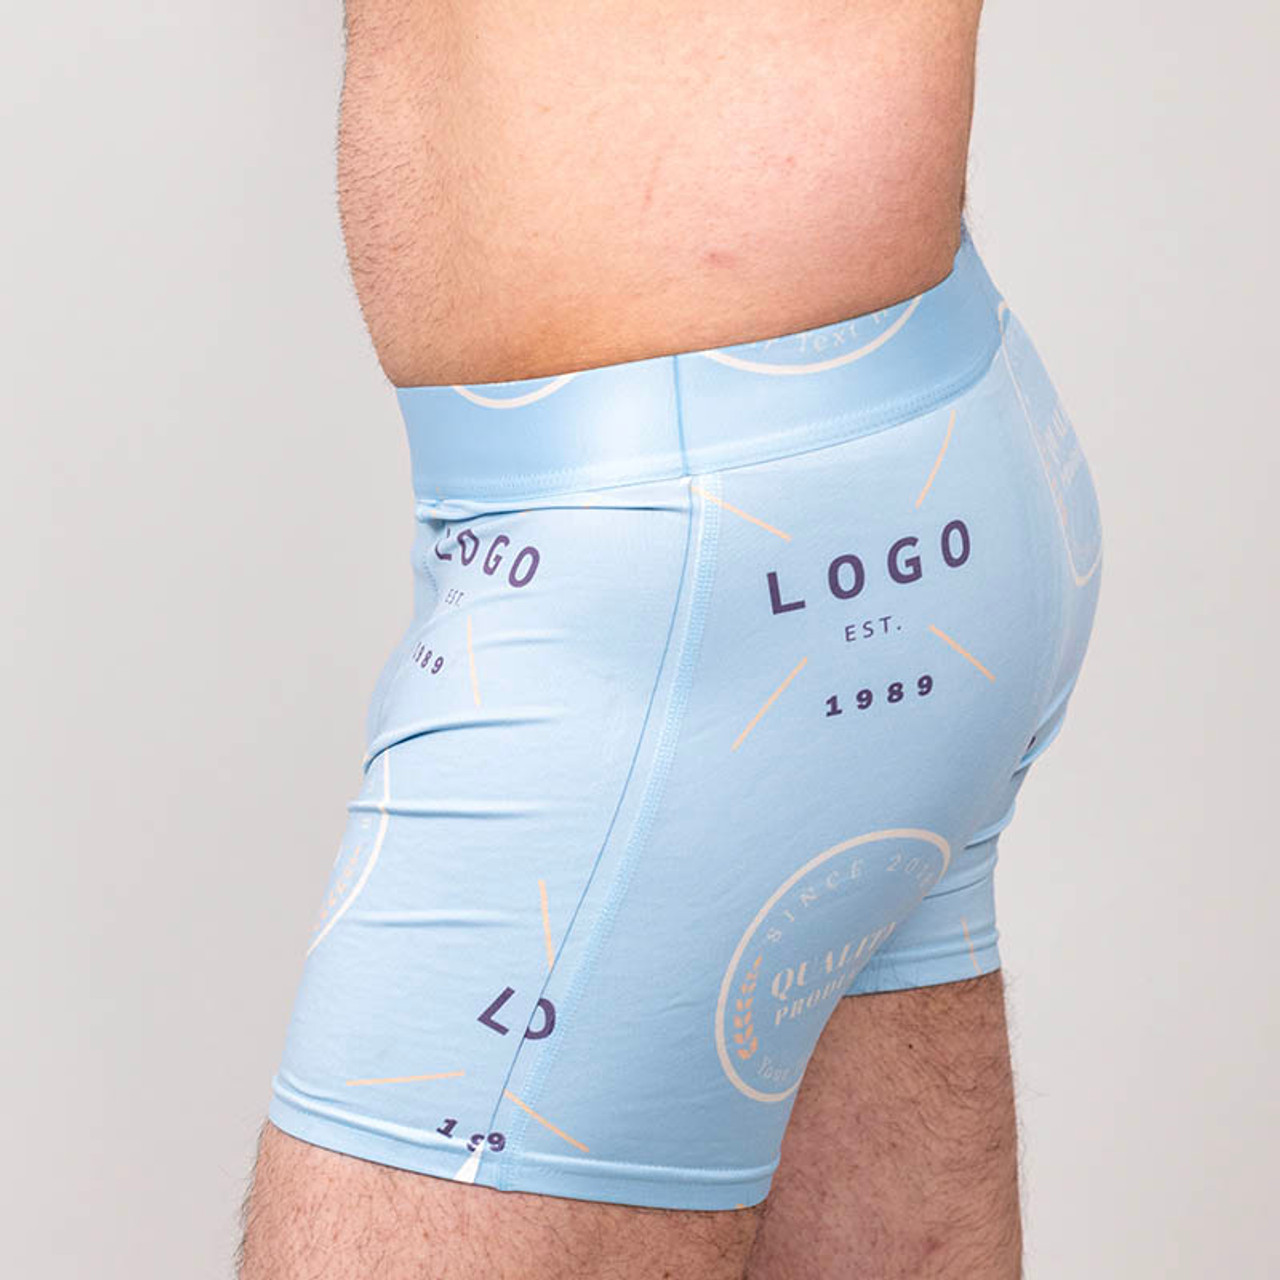 Sublimation Boxers by Silky Socks